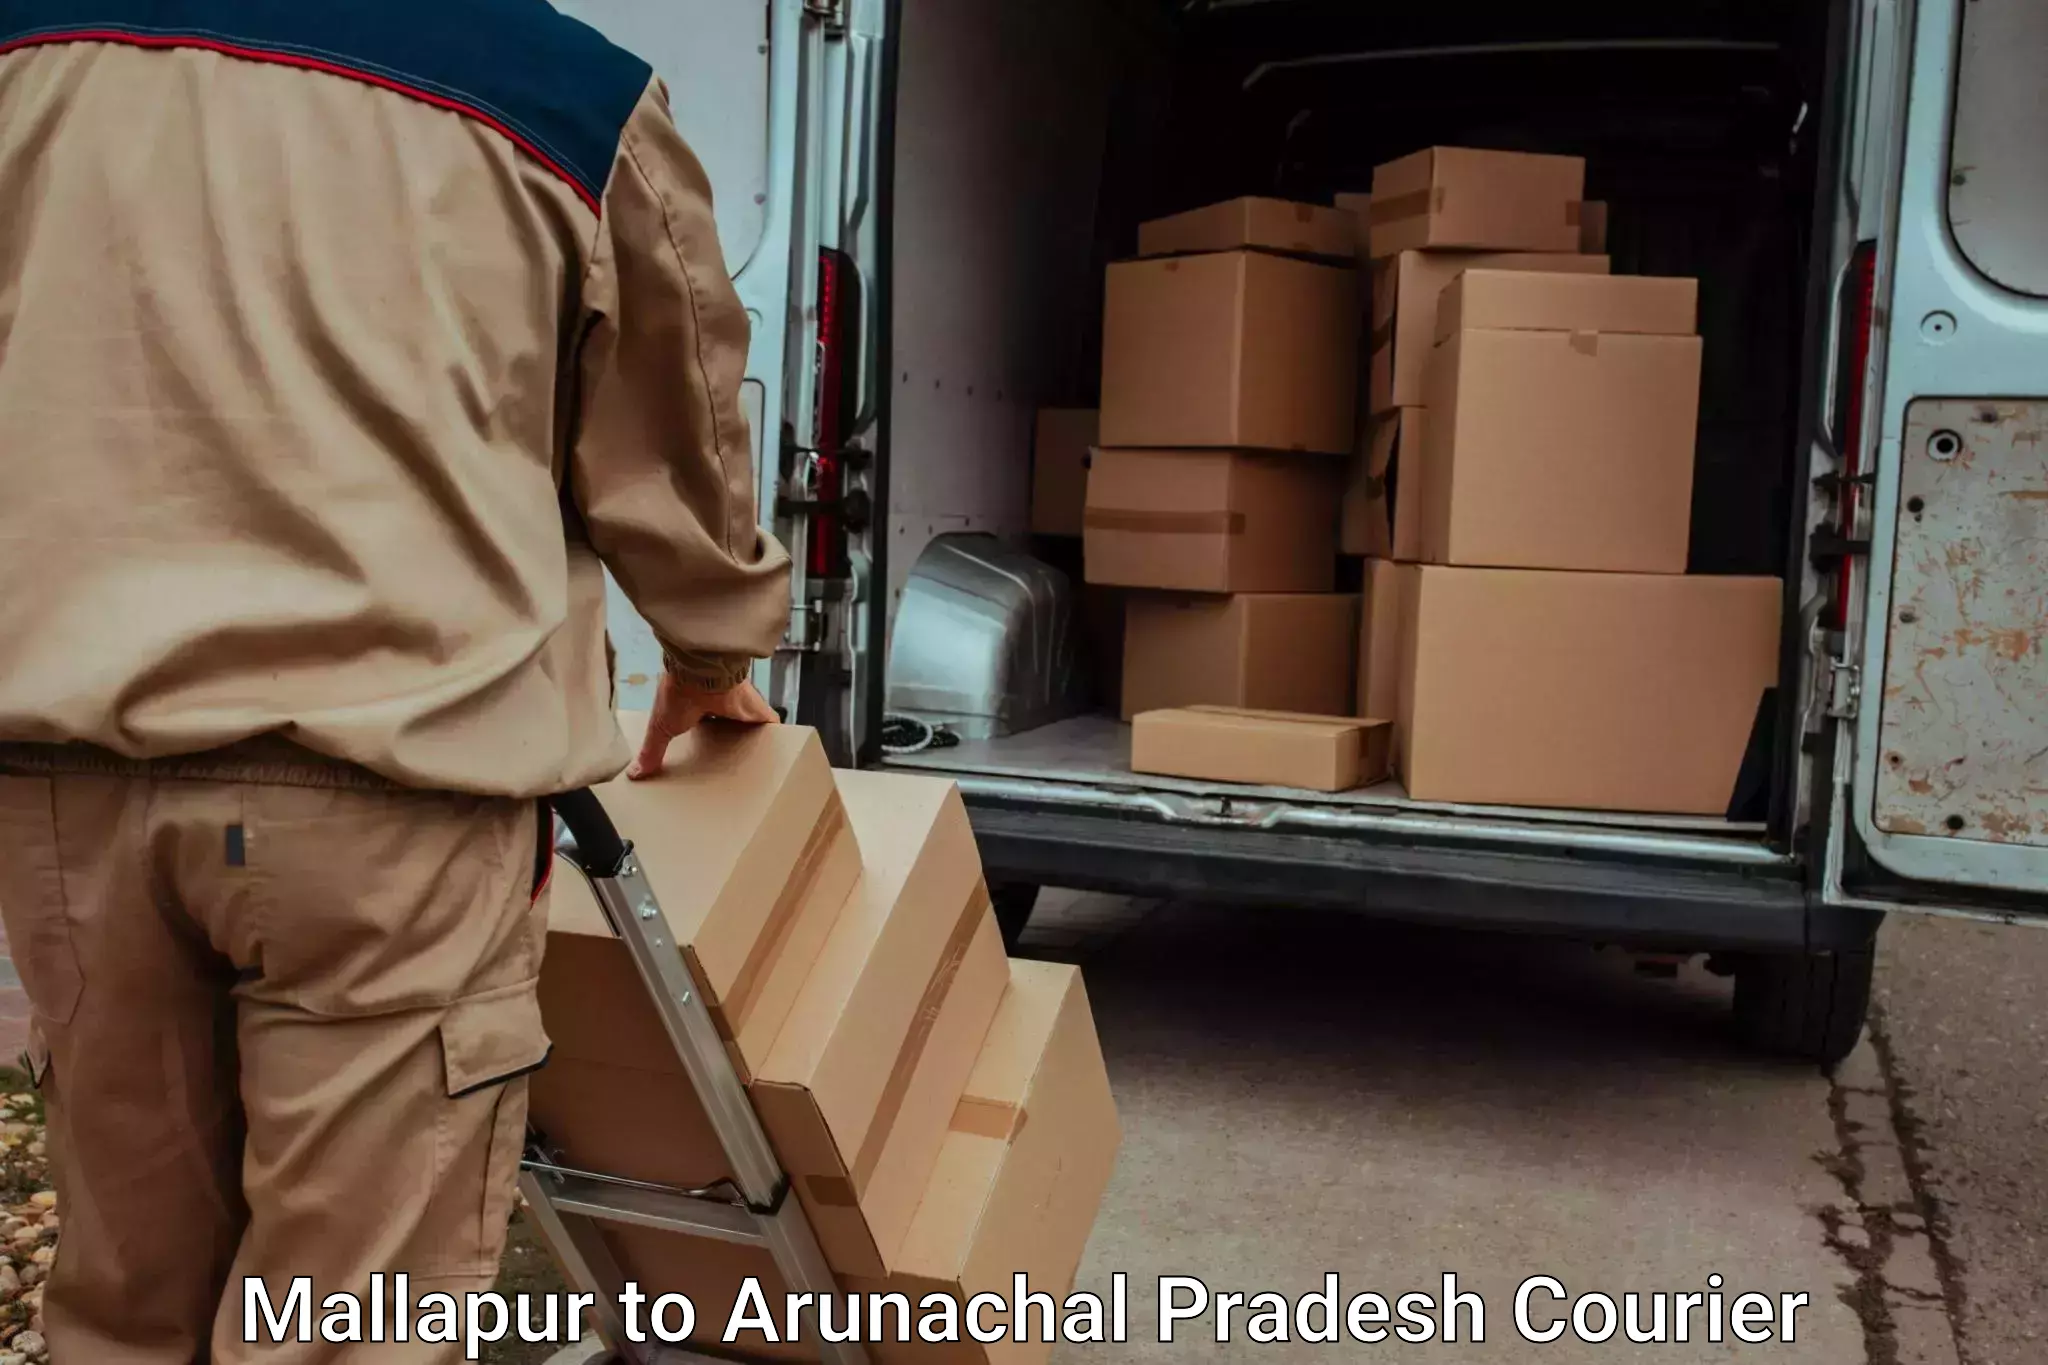 Furniture transport experts Mallapur to Changlang